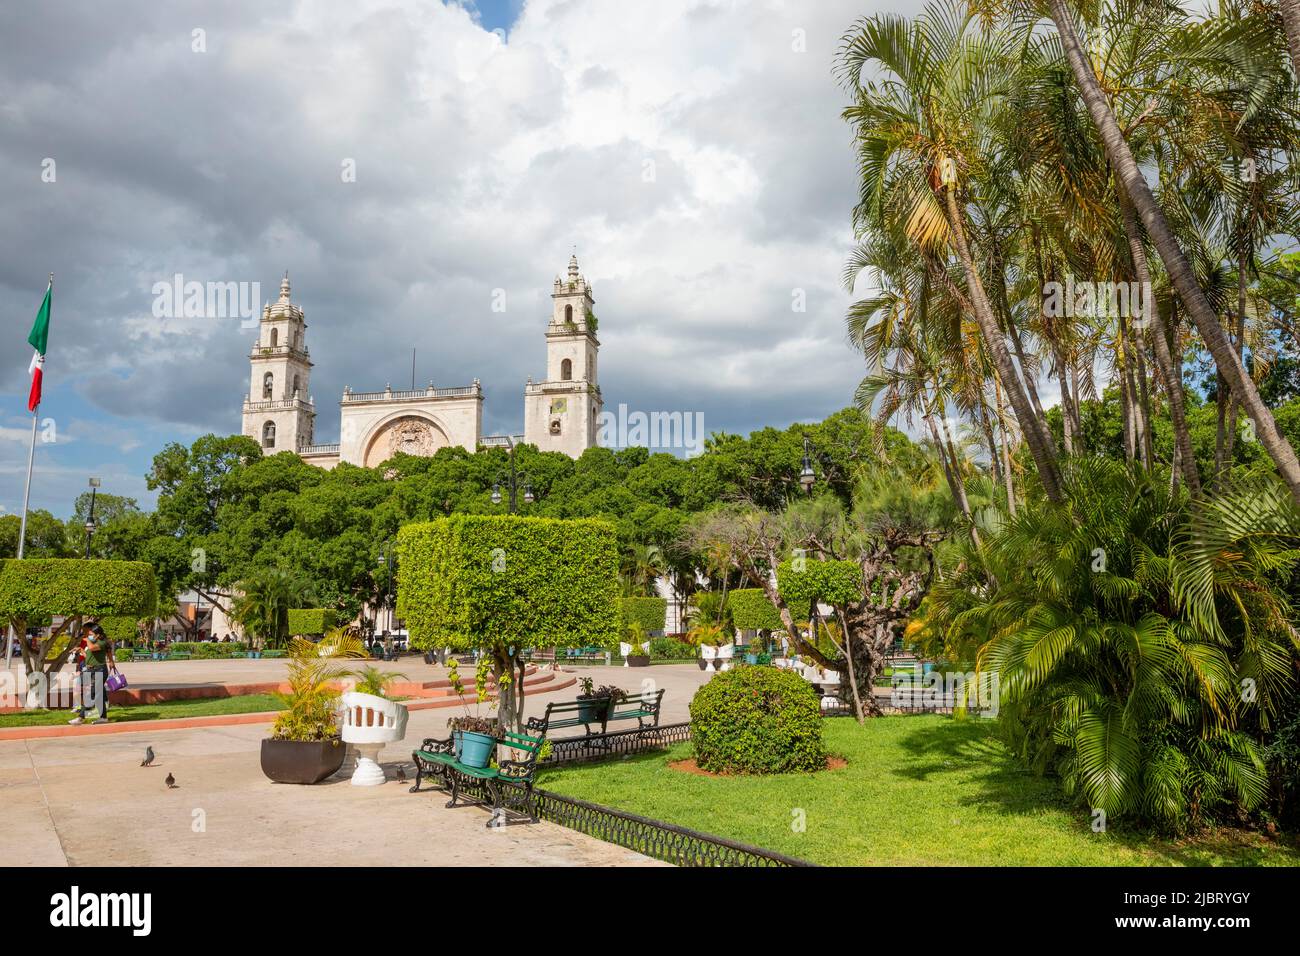 Mexico, Yucatán state, Merida capital of Yucatán, main square of Merida Plaza Grande with the cathedral in the background Stock Photo